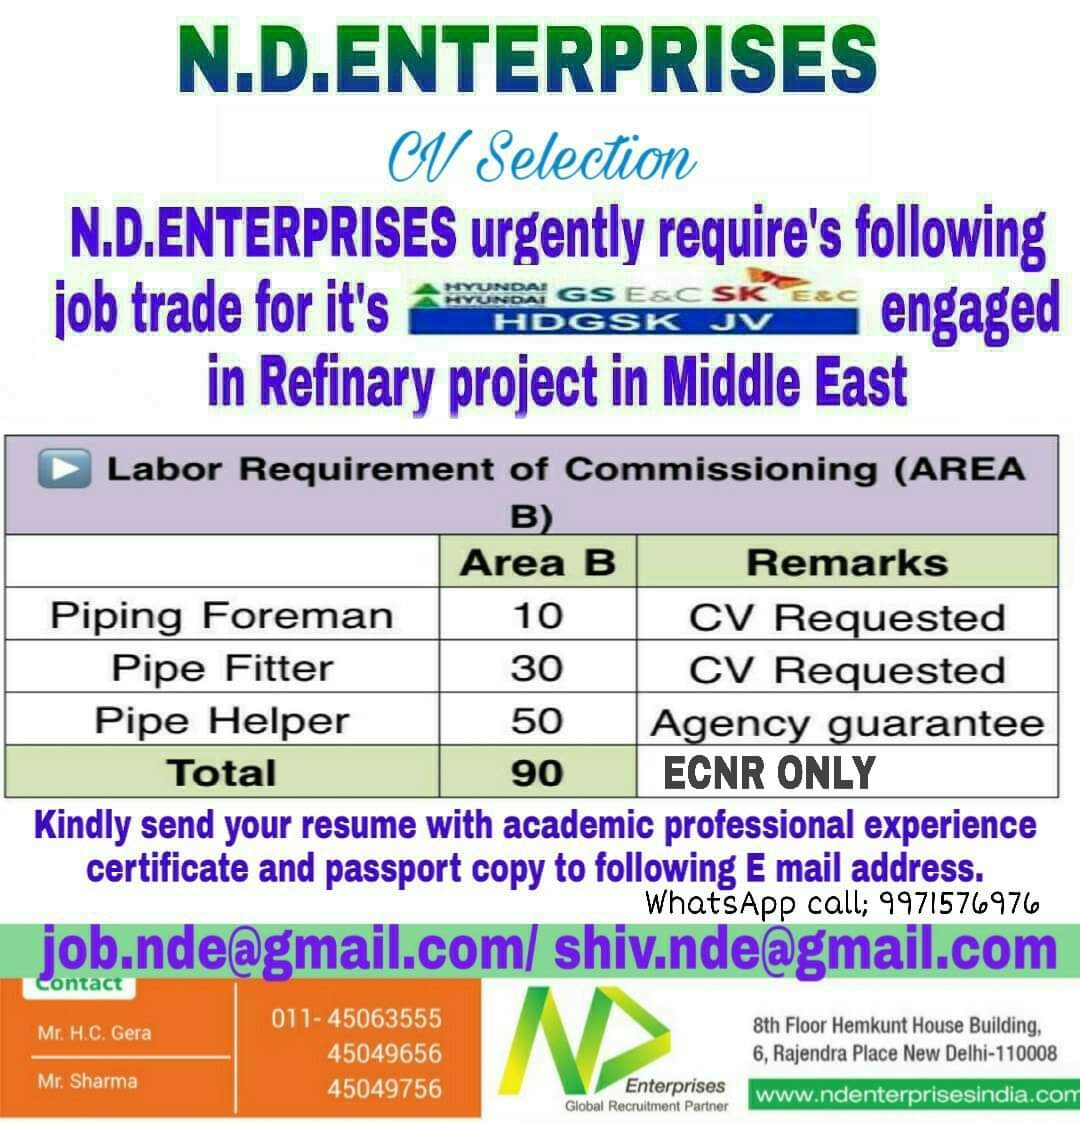 URGENTLY REQUIRES FOR JOB TRADE ENGAGED IN REFINARY PROJECT